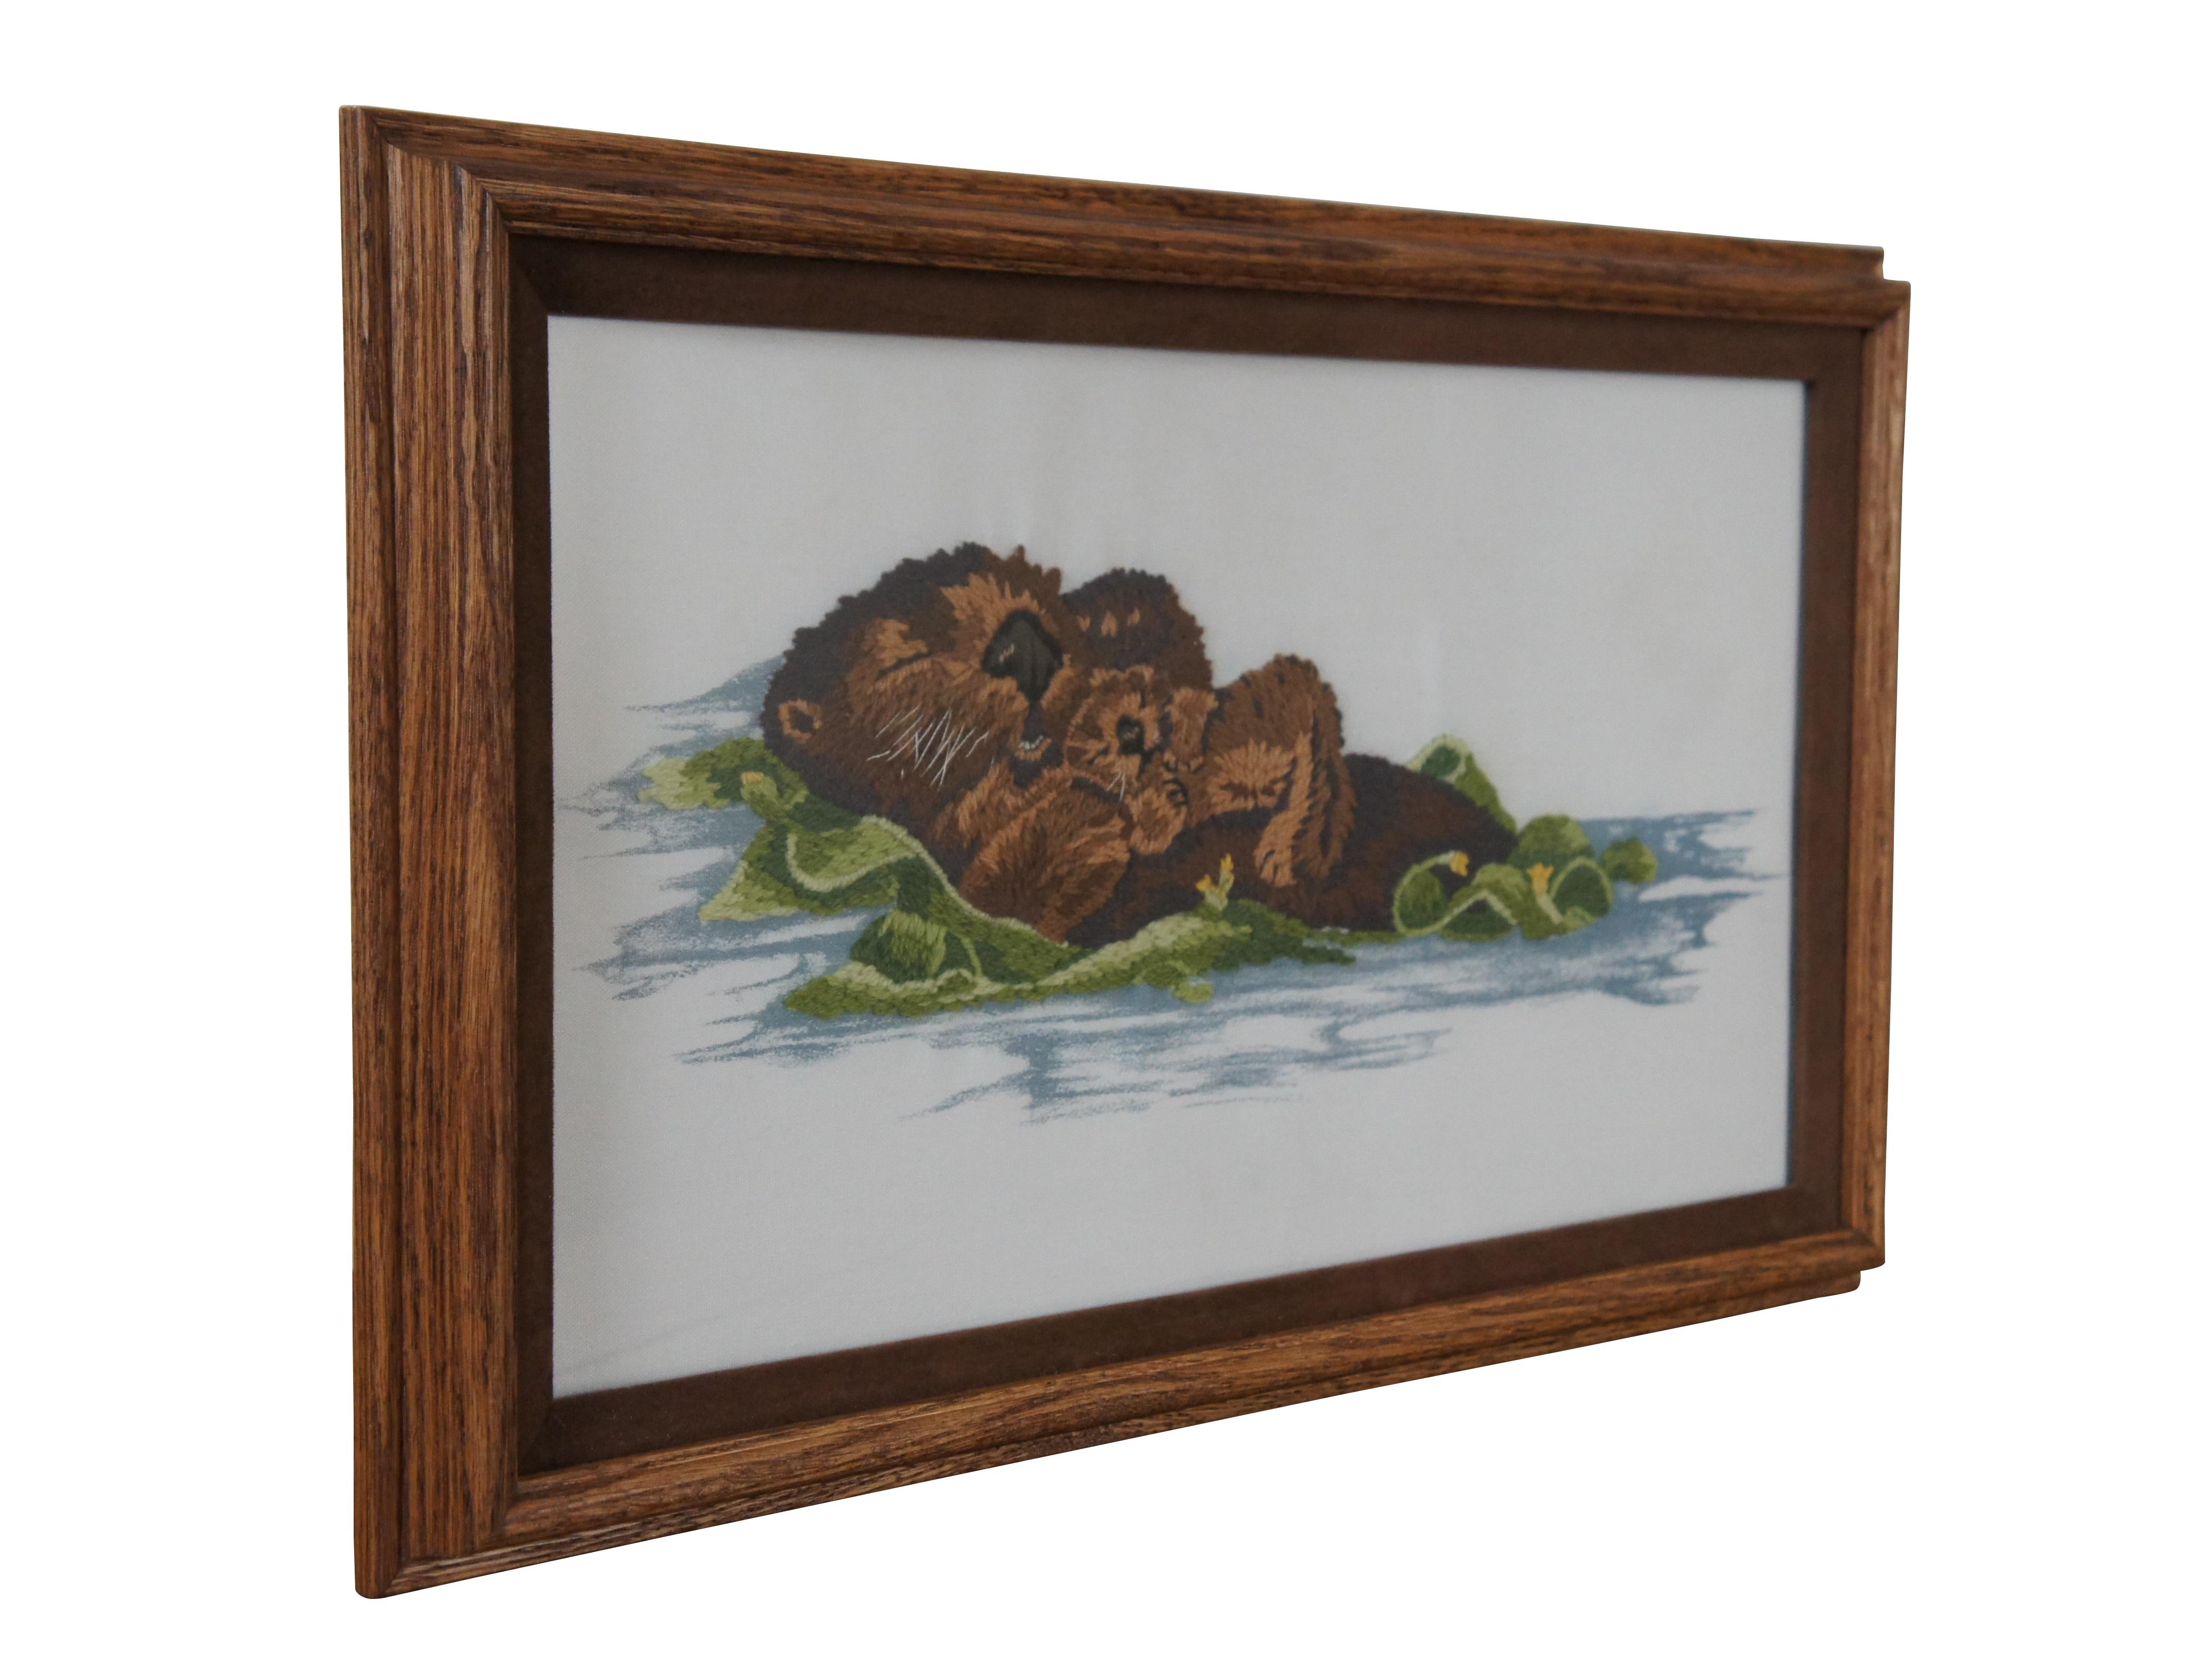 Virginia Miller for Janlynn Embroidered Cross Stitch Sea Otter & Pup Seascape 20 In Good Condition In Dayton, OH